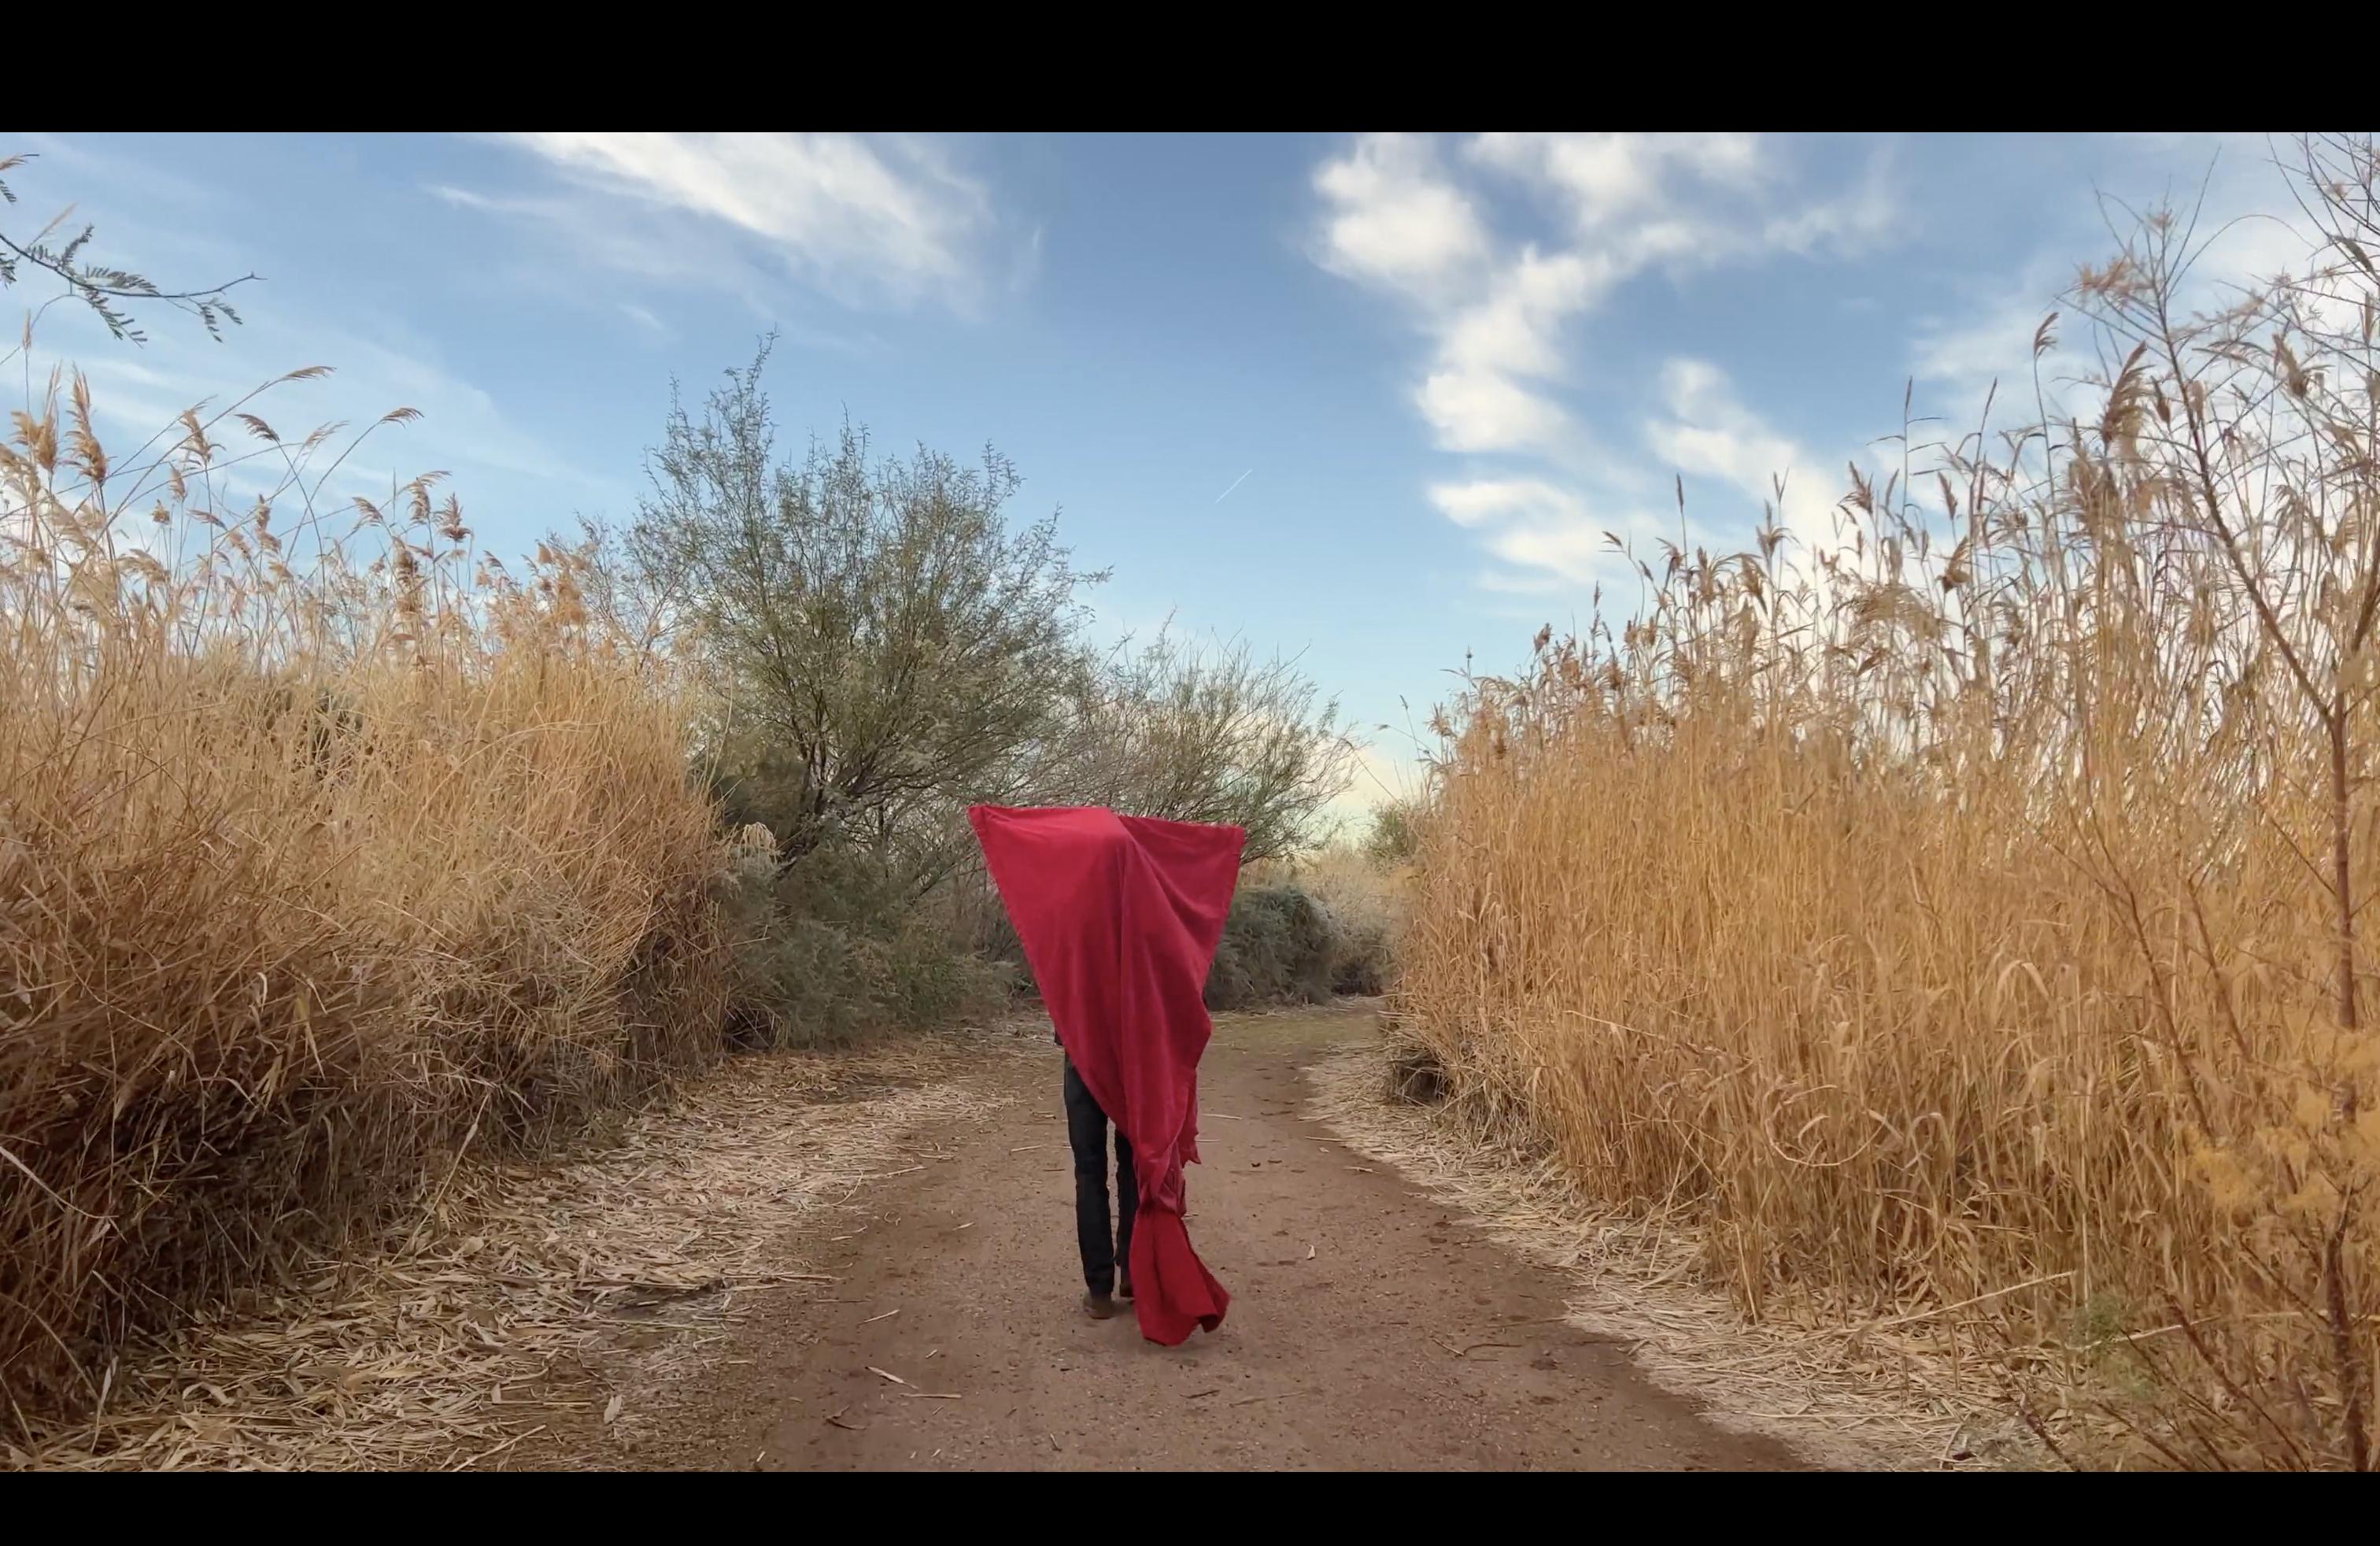 A person stands on a path lined with tall grasses holding a large red shroud over their head